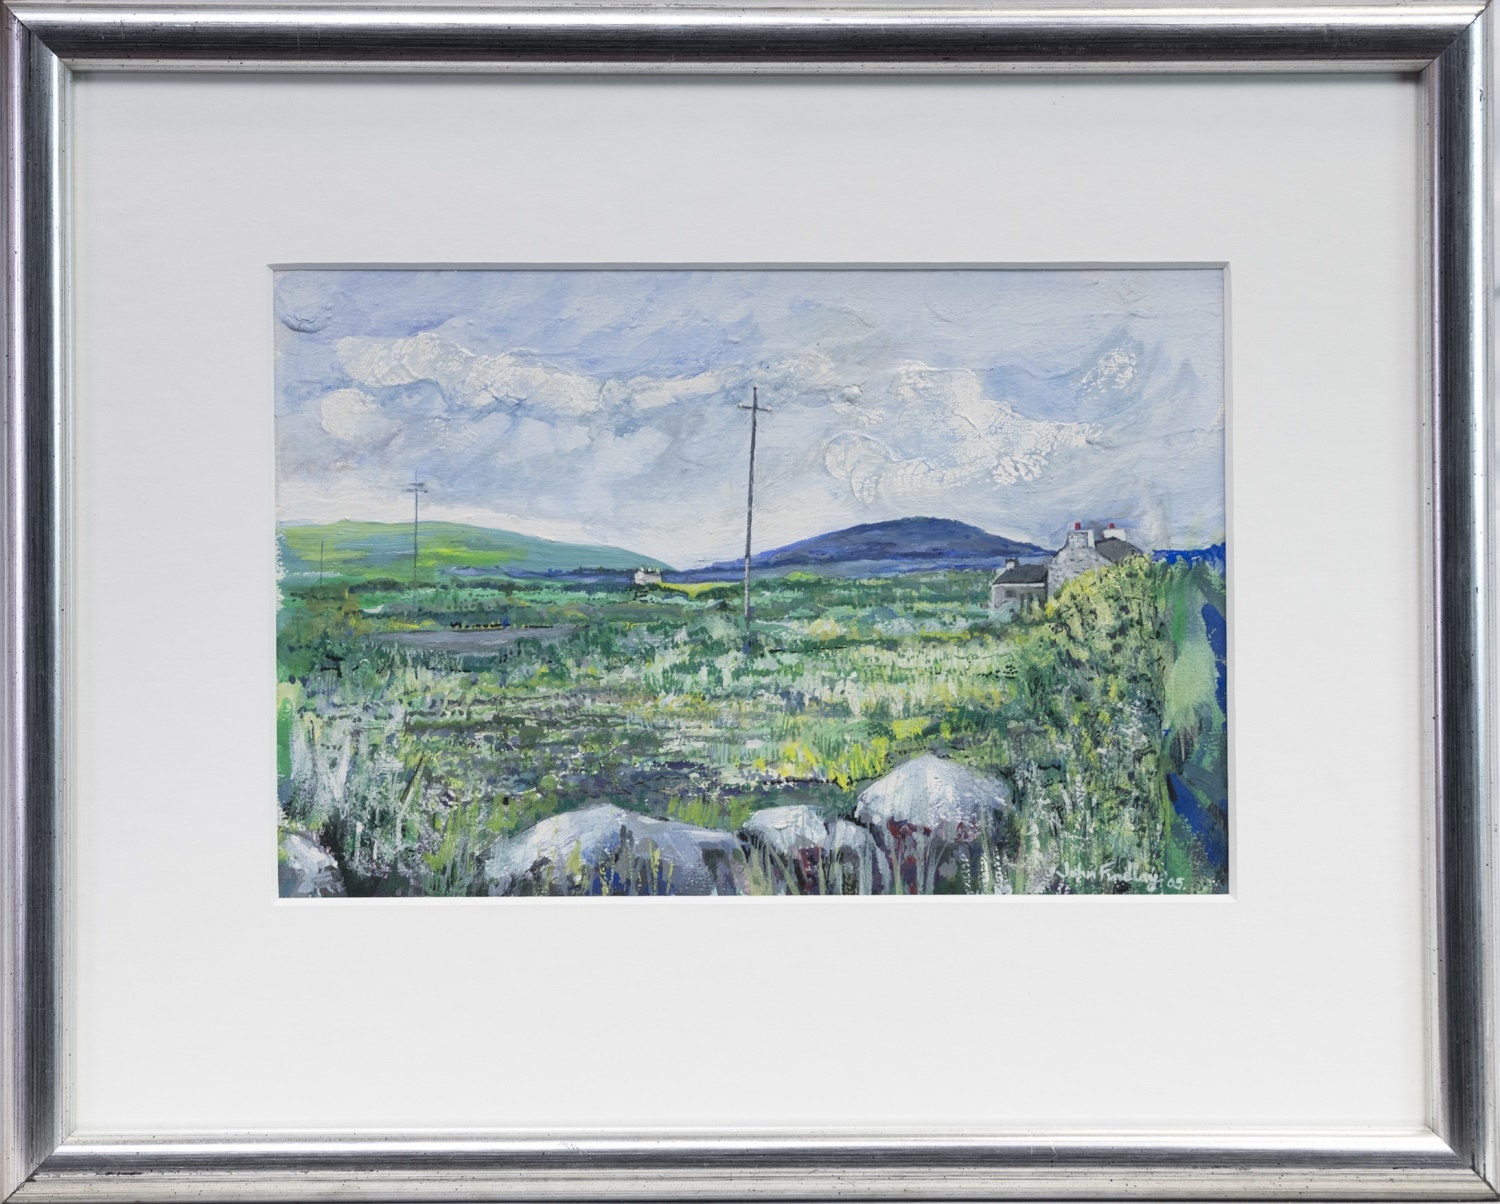 RING OF KERRY, A WATERCOLOUR AND GOUACHE BY JOHN FINDLAY